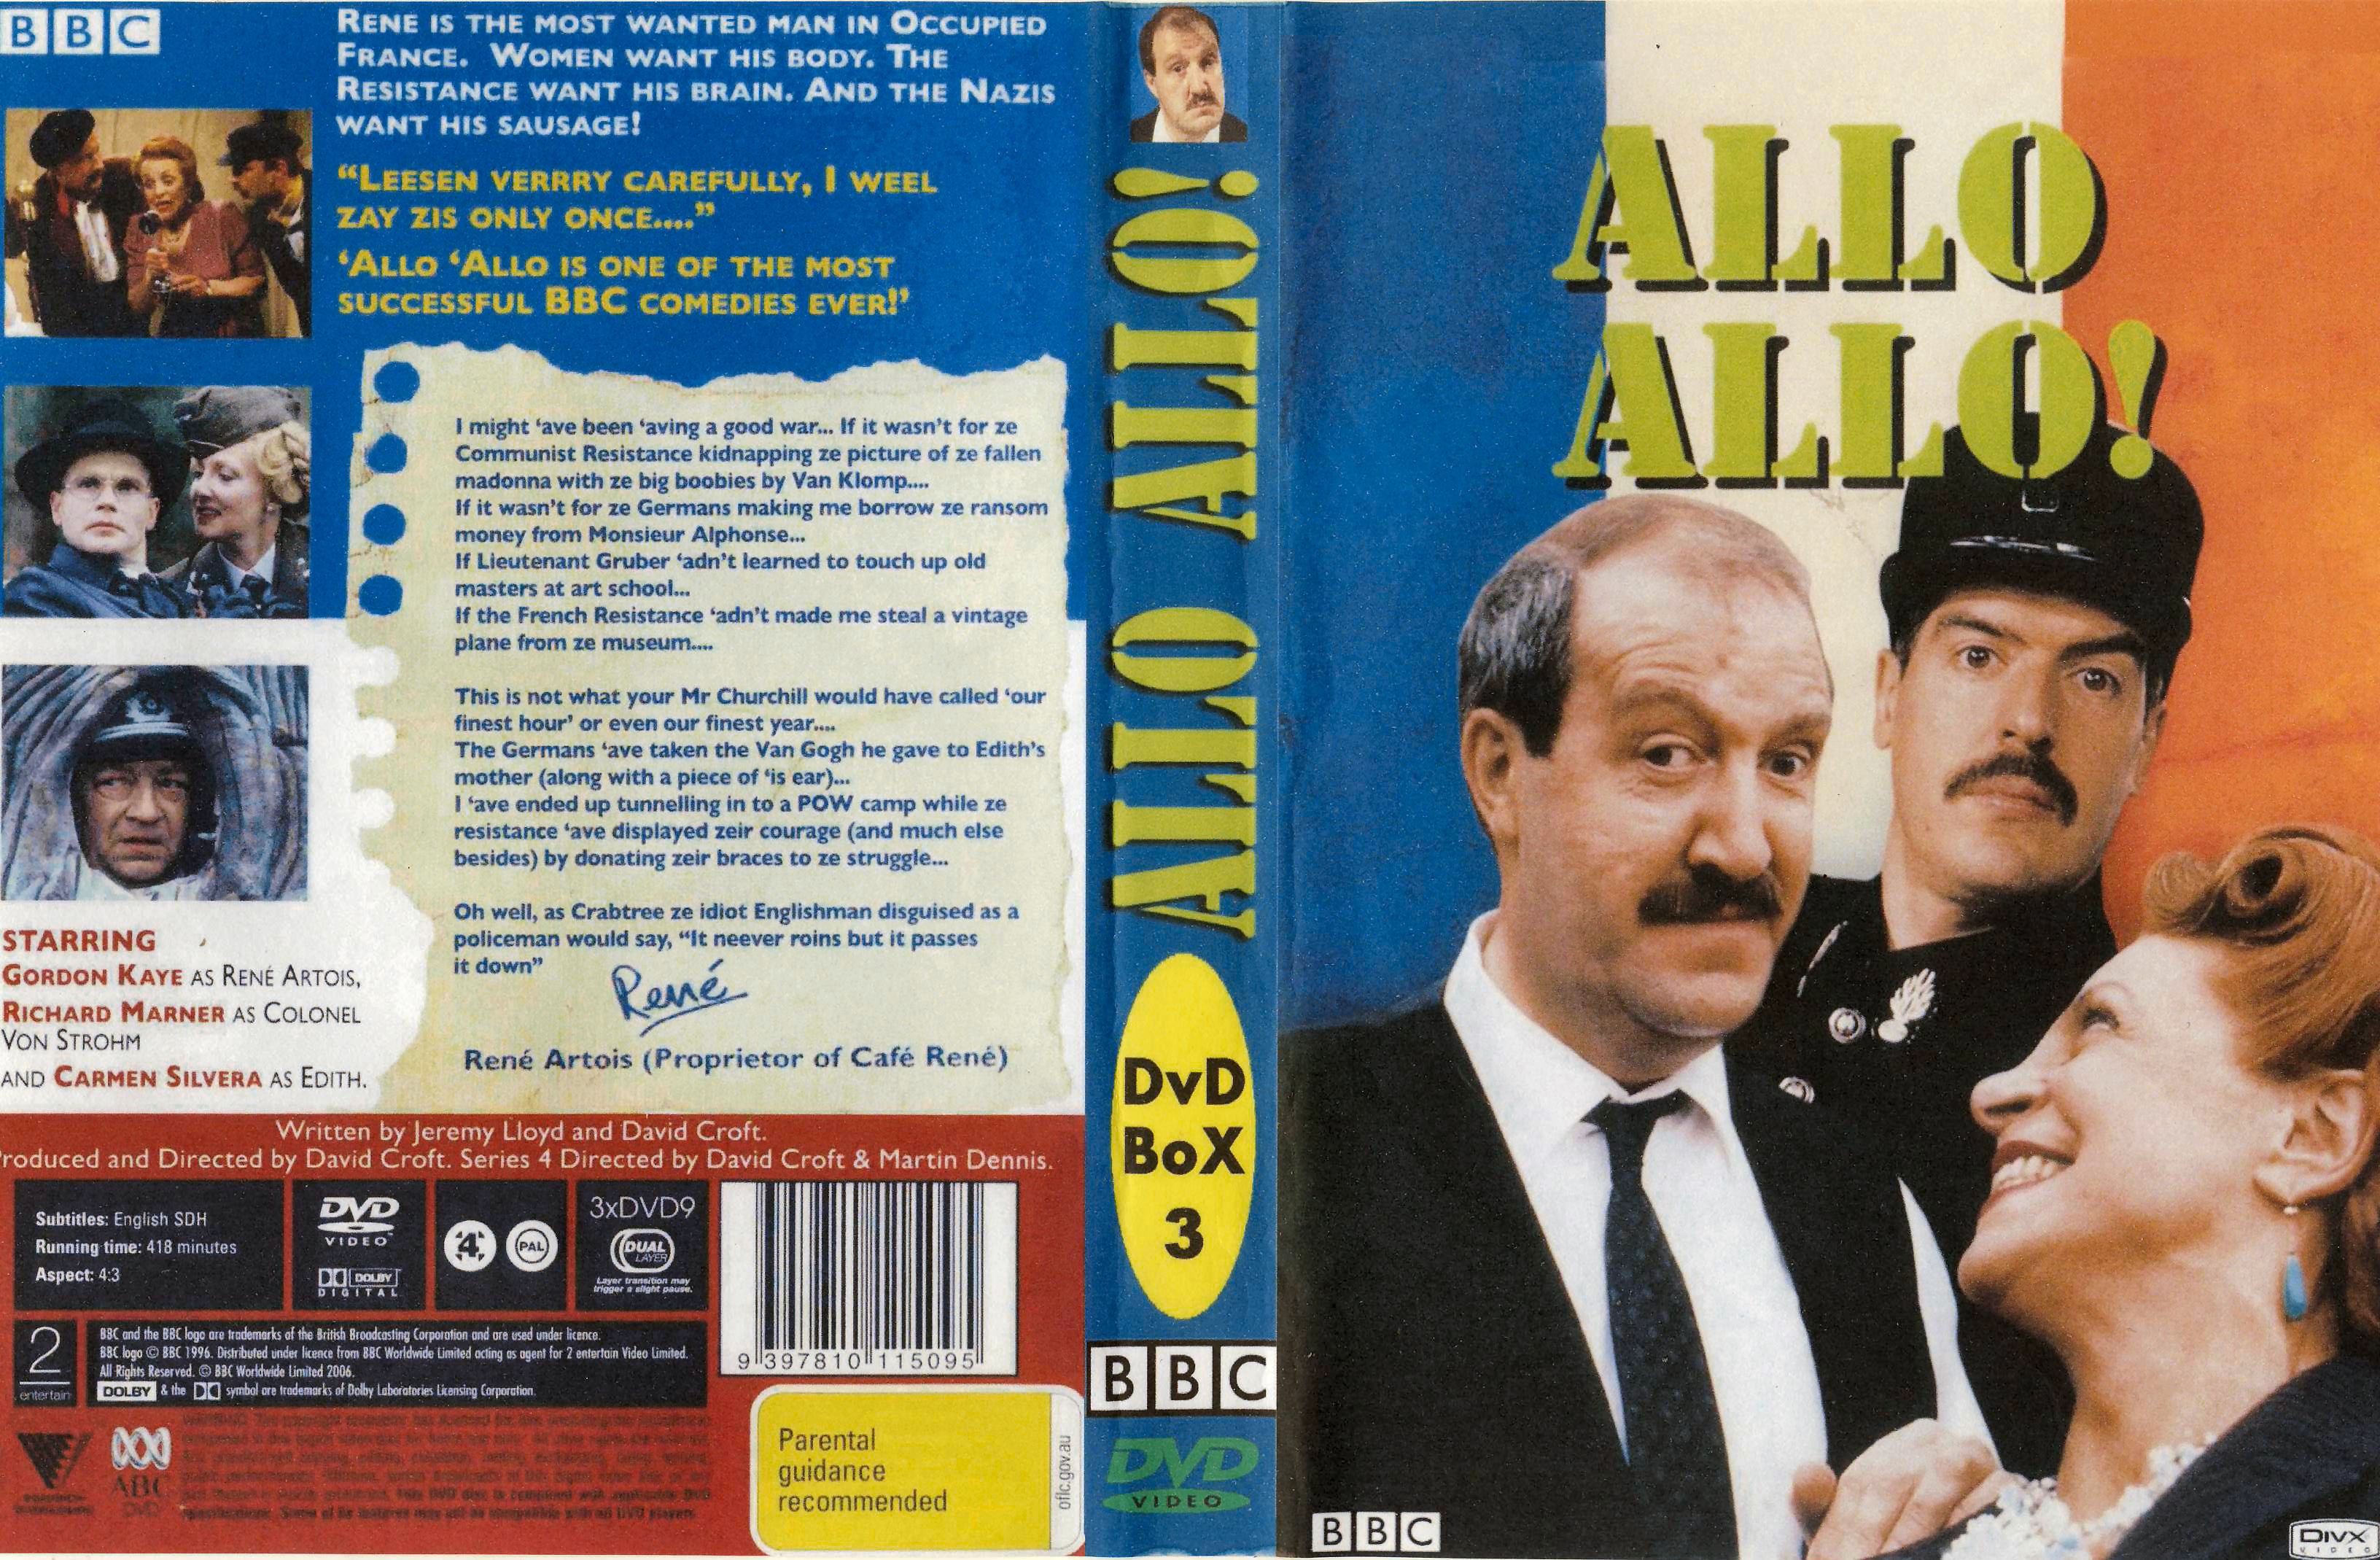 'Allo 'Allo! (1984-1992) DvD 16 van 17 Christmas Special - The Gateau from the Chateau